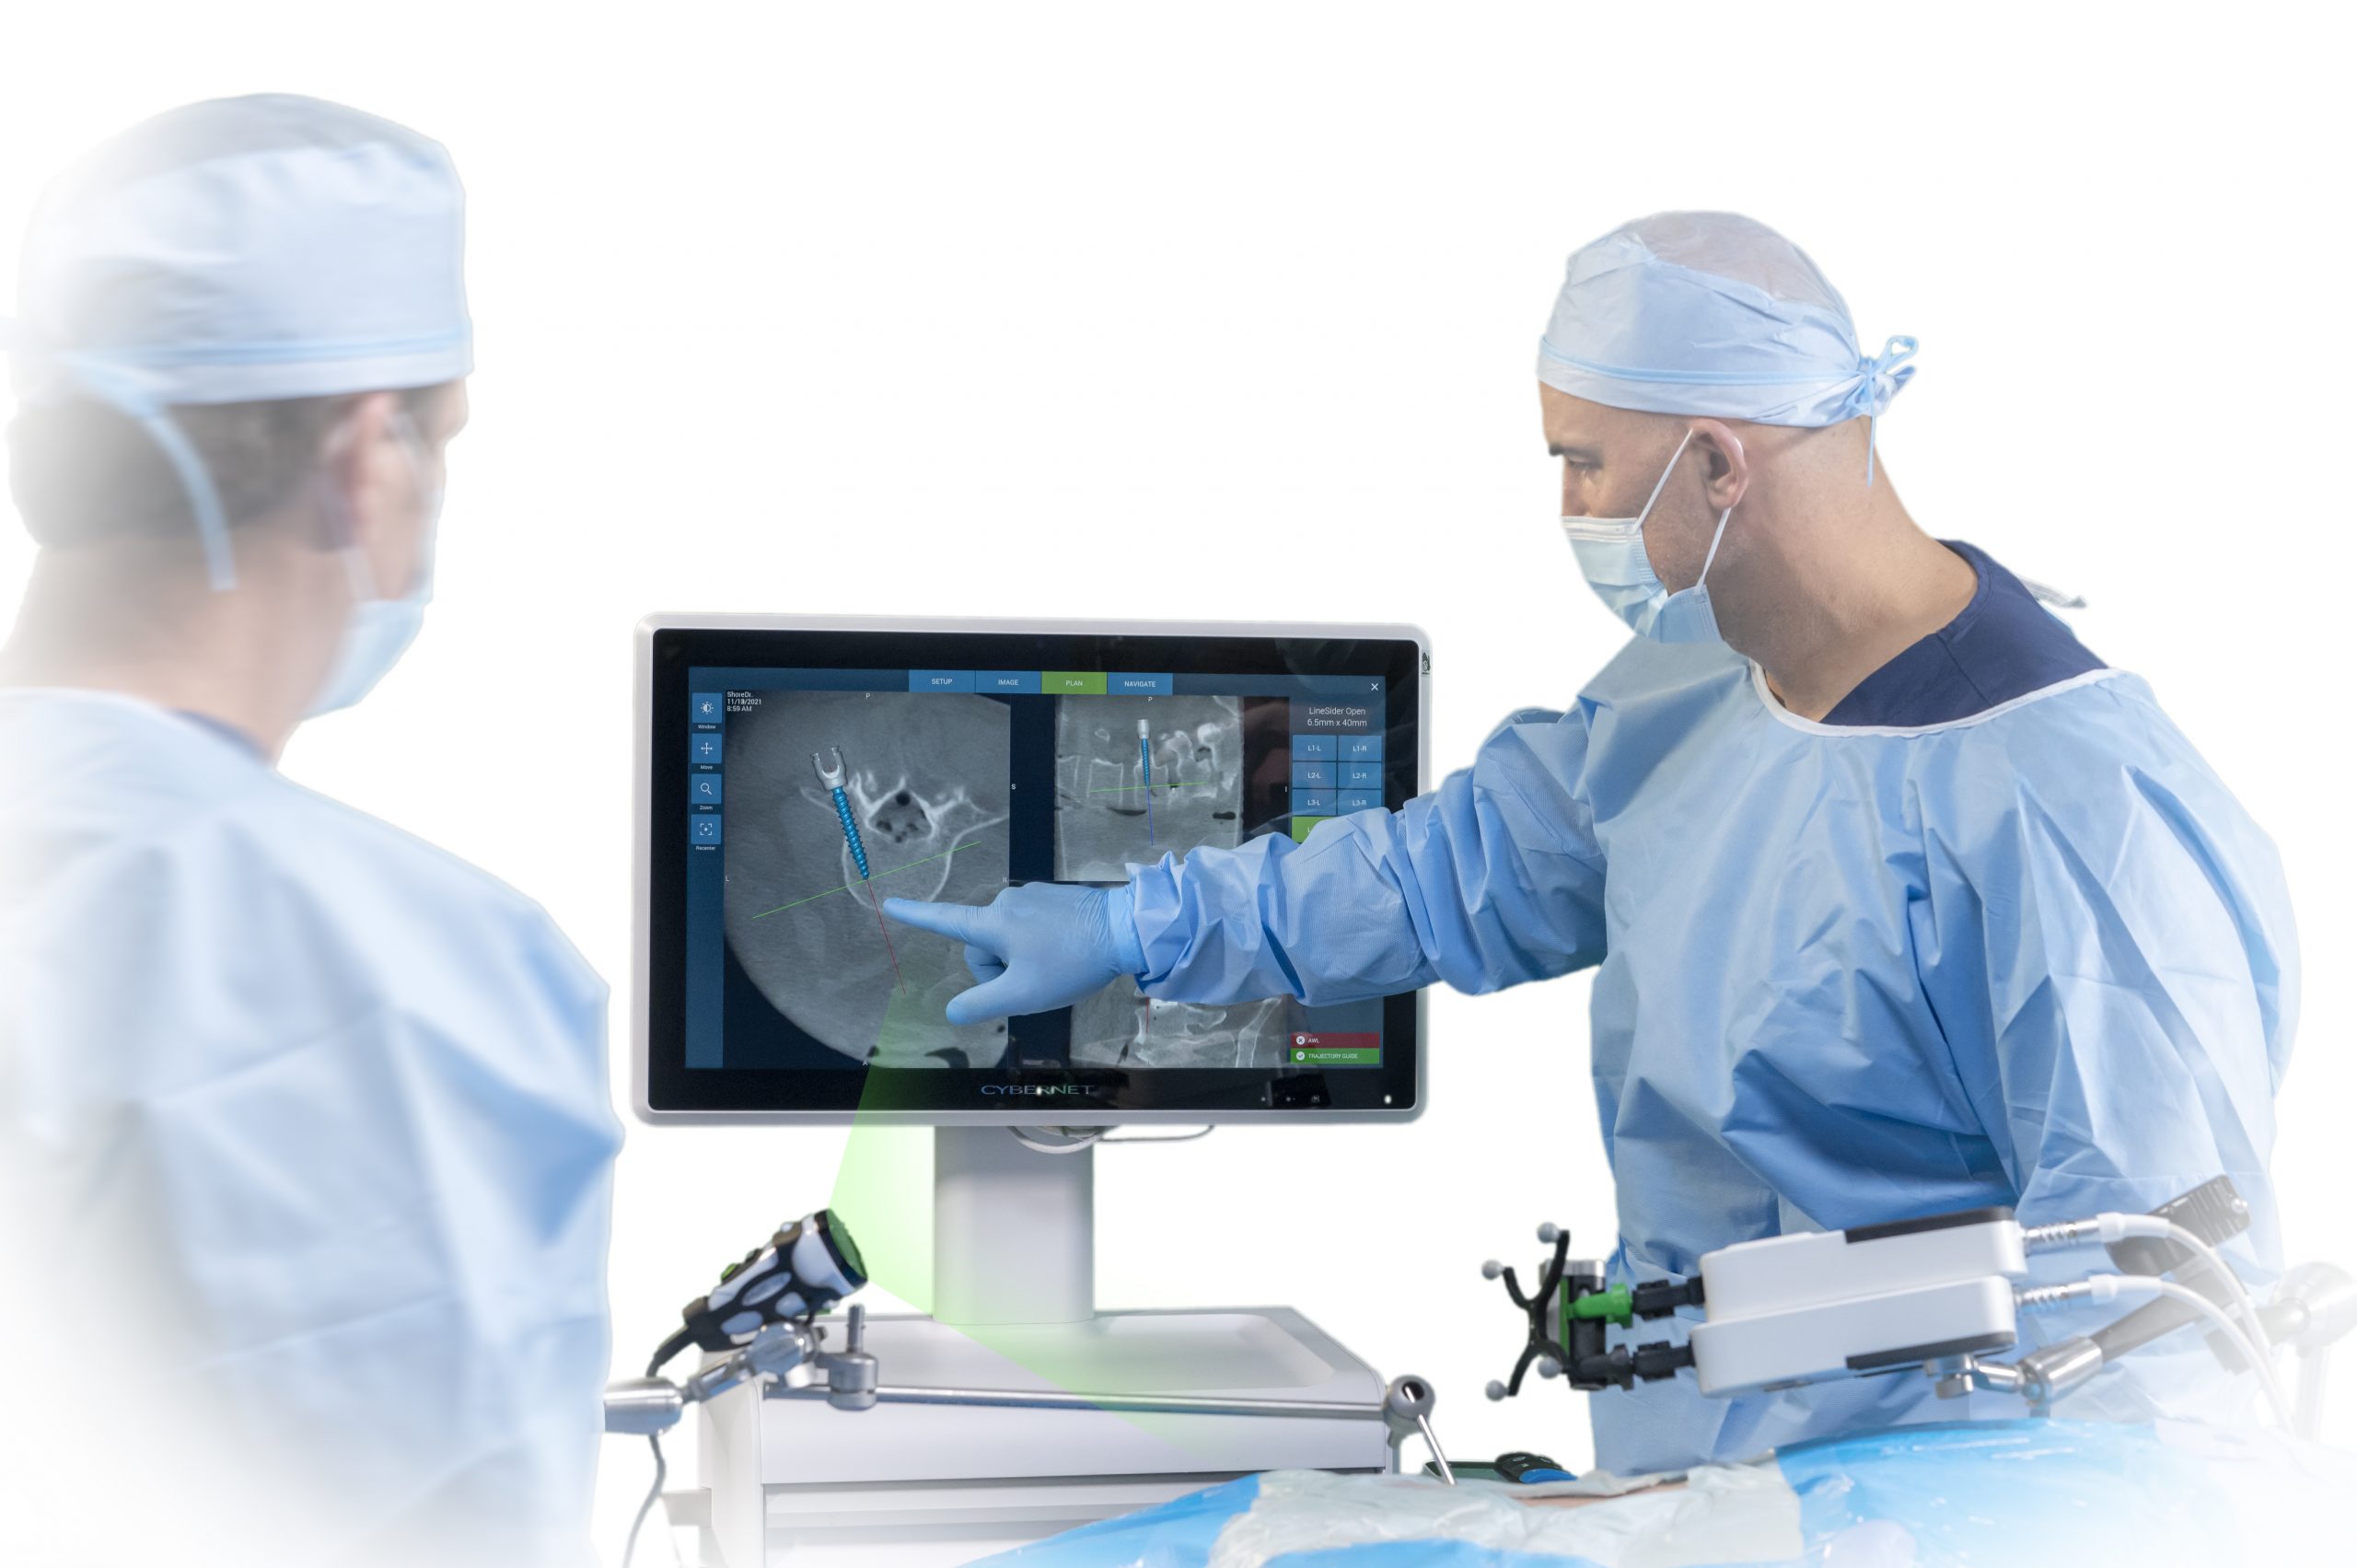 IJX camera on Accelus Remi Robotic system for spine surgery